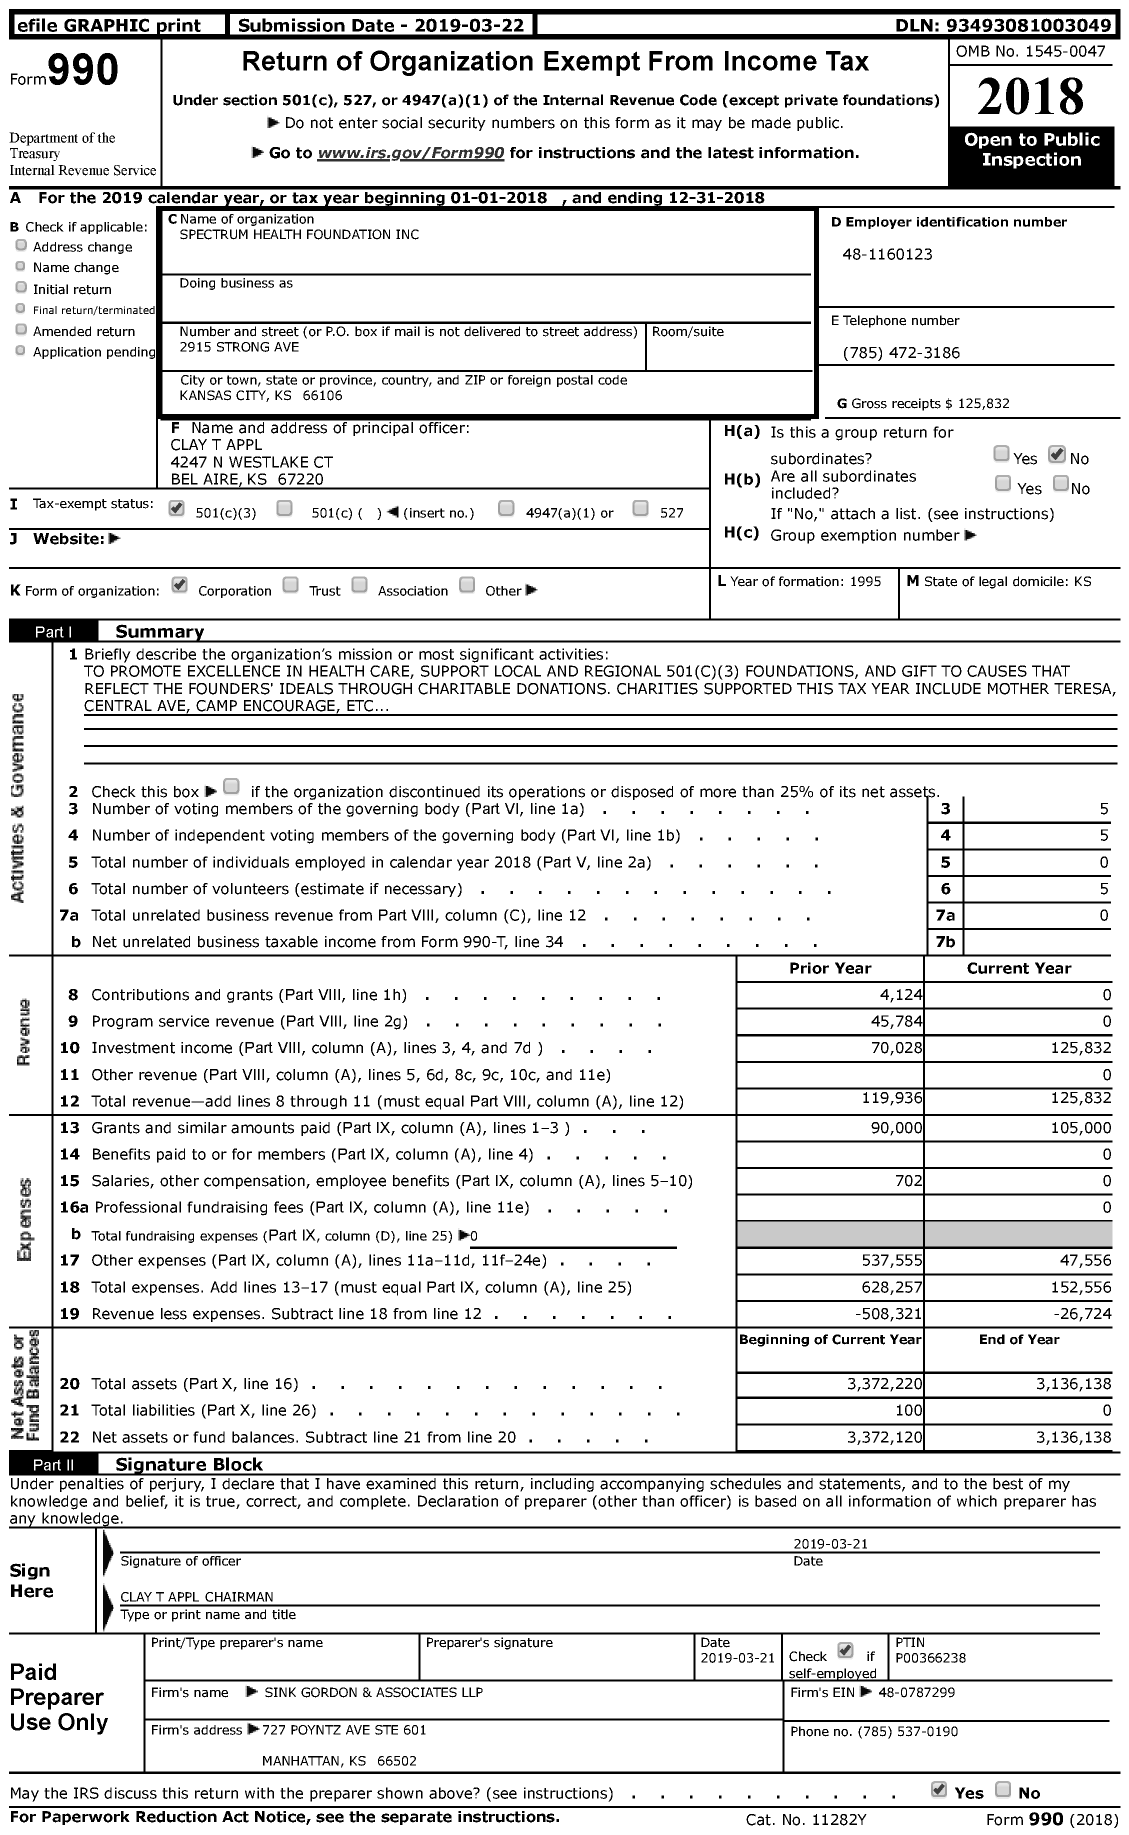 Image of first page of 2018 Form 990 for SPECTRUM HEALTH Foundation / Spectrum Home Health Agency